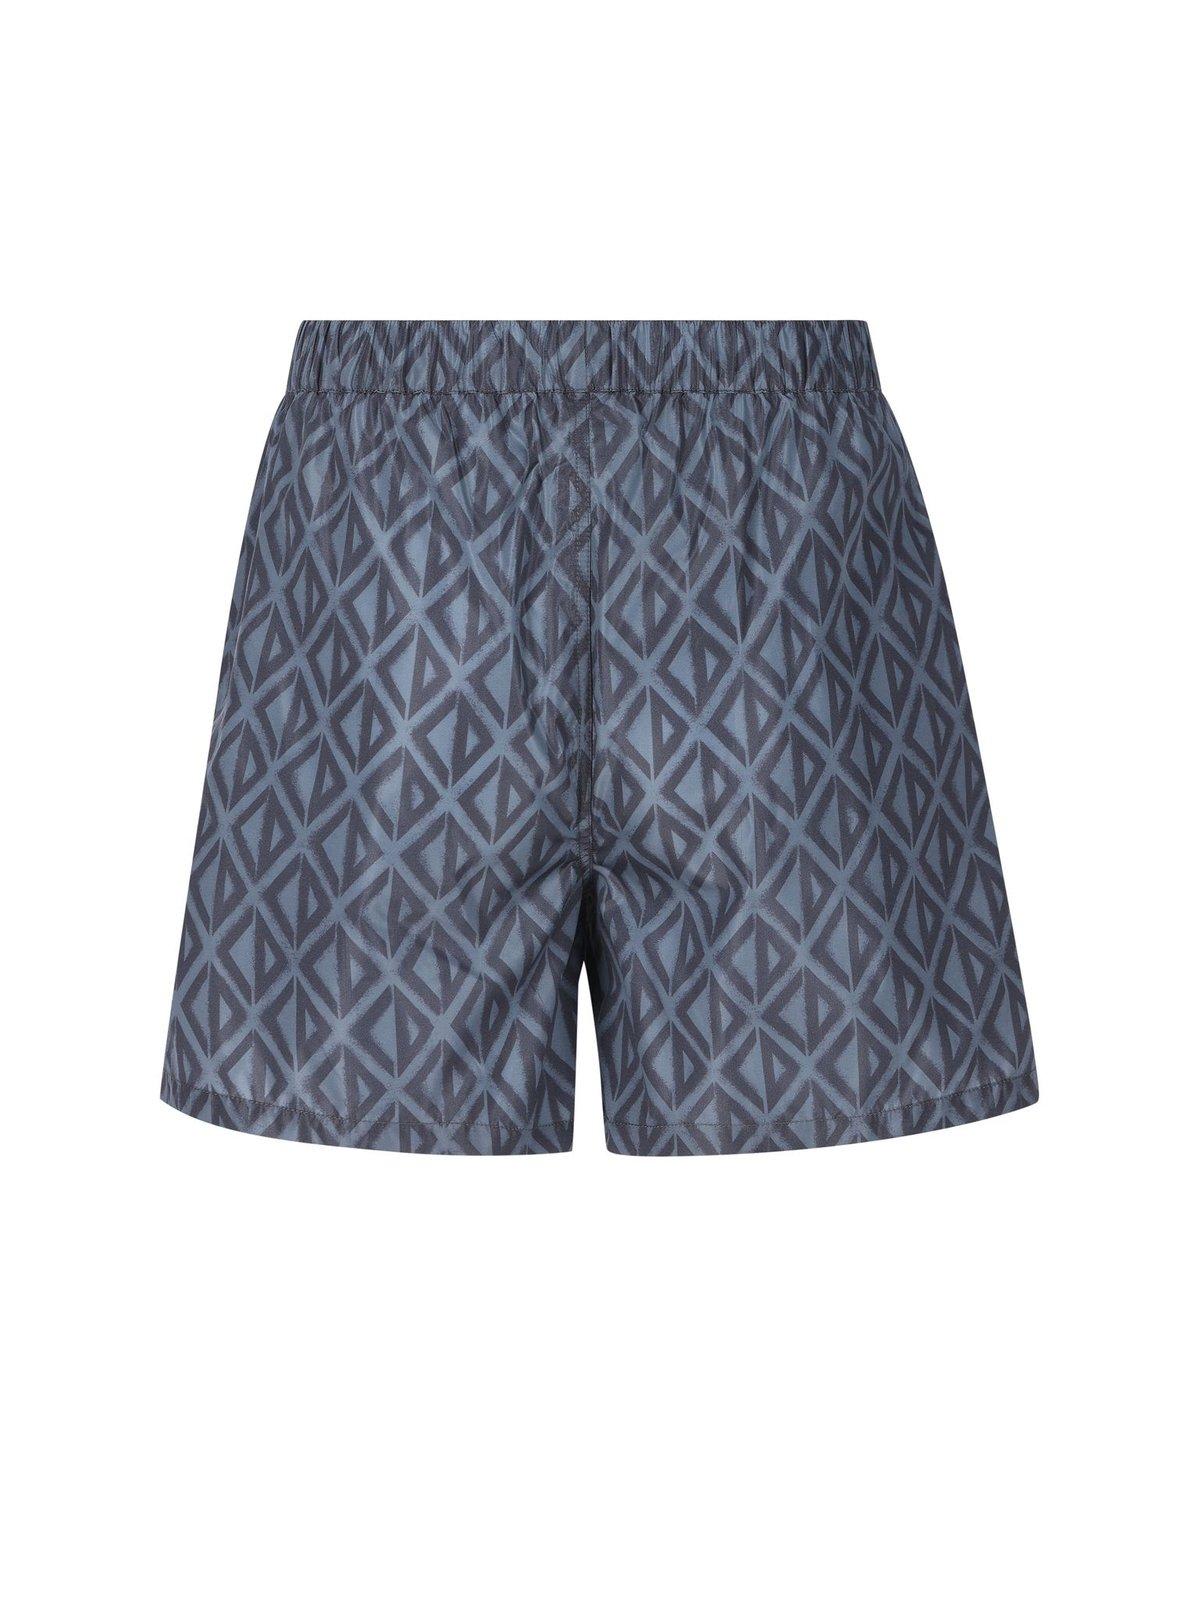 Shop Dior All-over Printed Mid-rise Swim Shorts